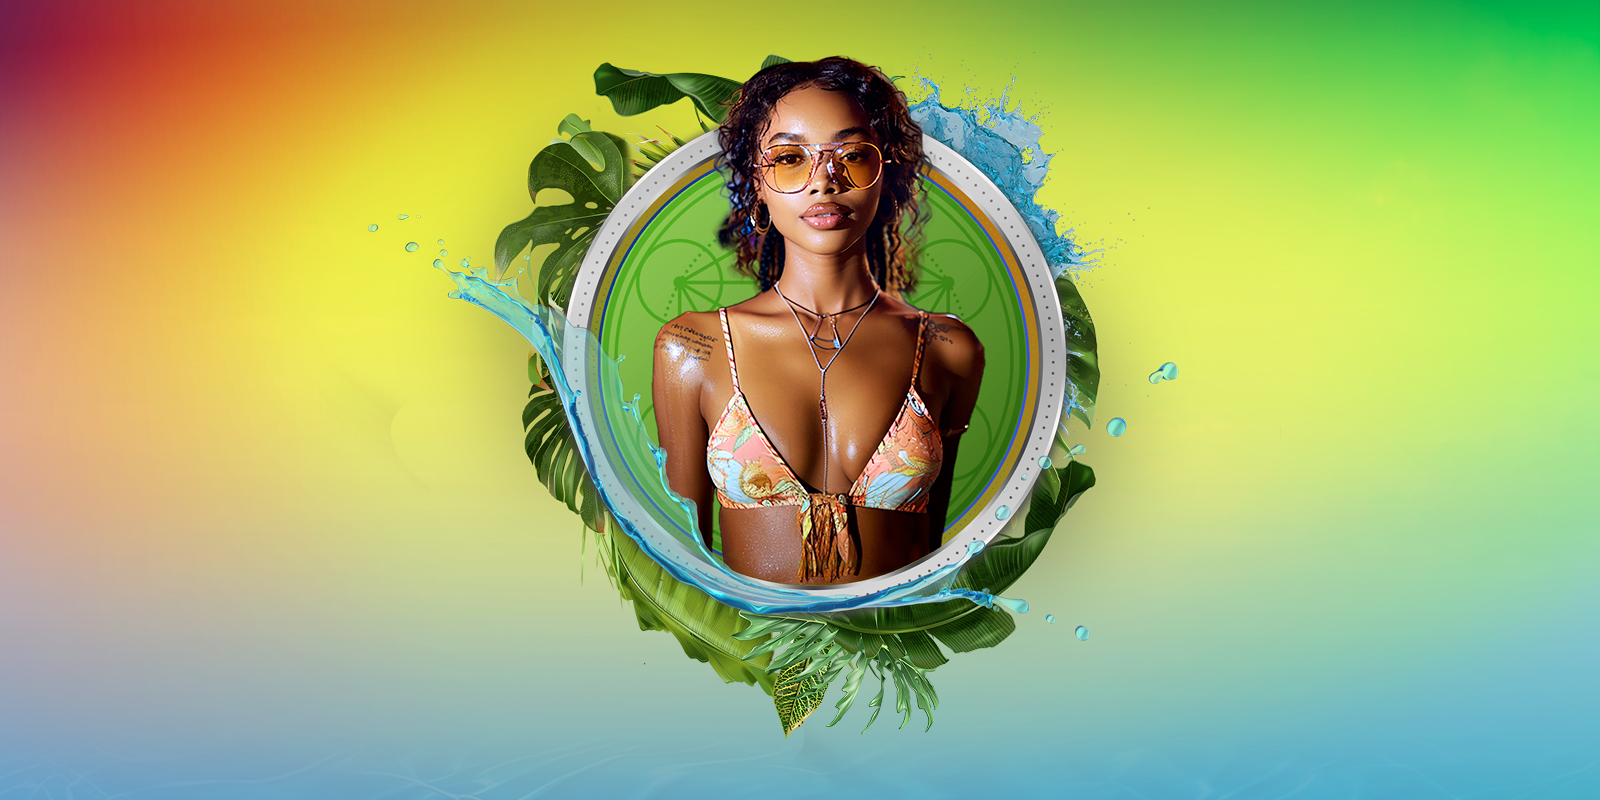 Reggae Nights creative showing a woman in a vibrant colorful background and a water esthetic.